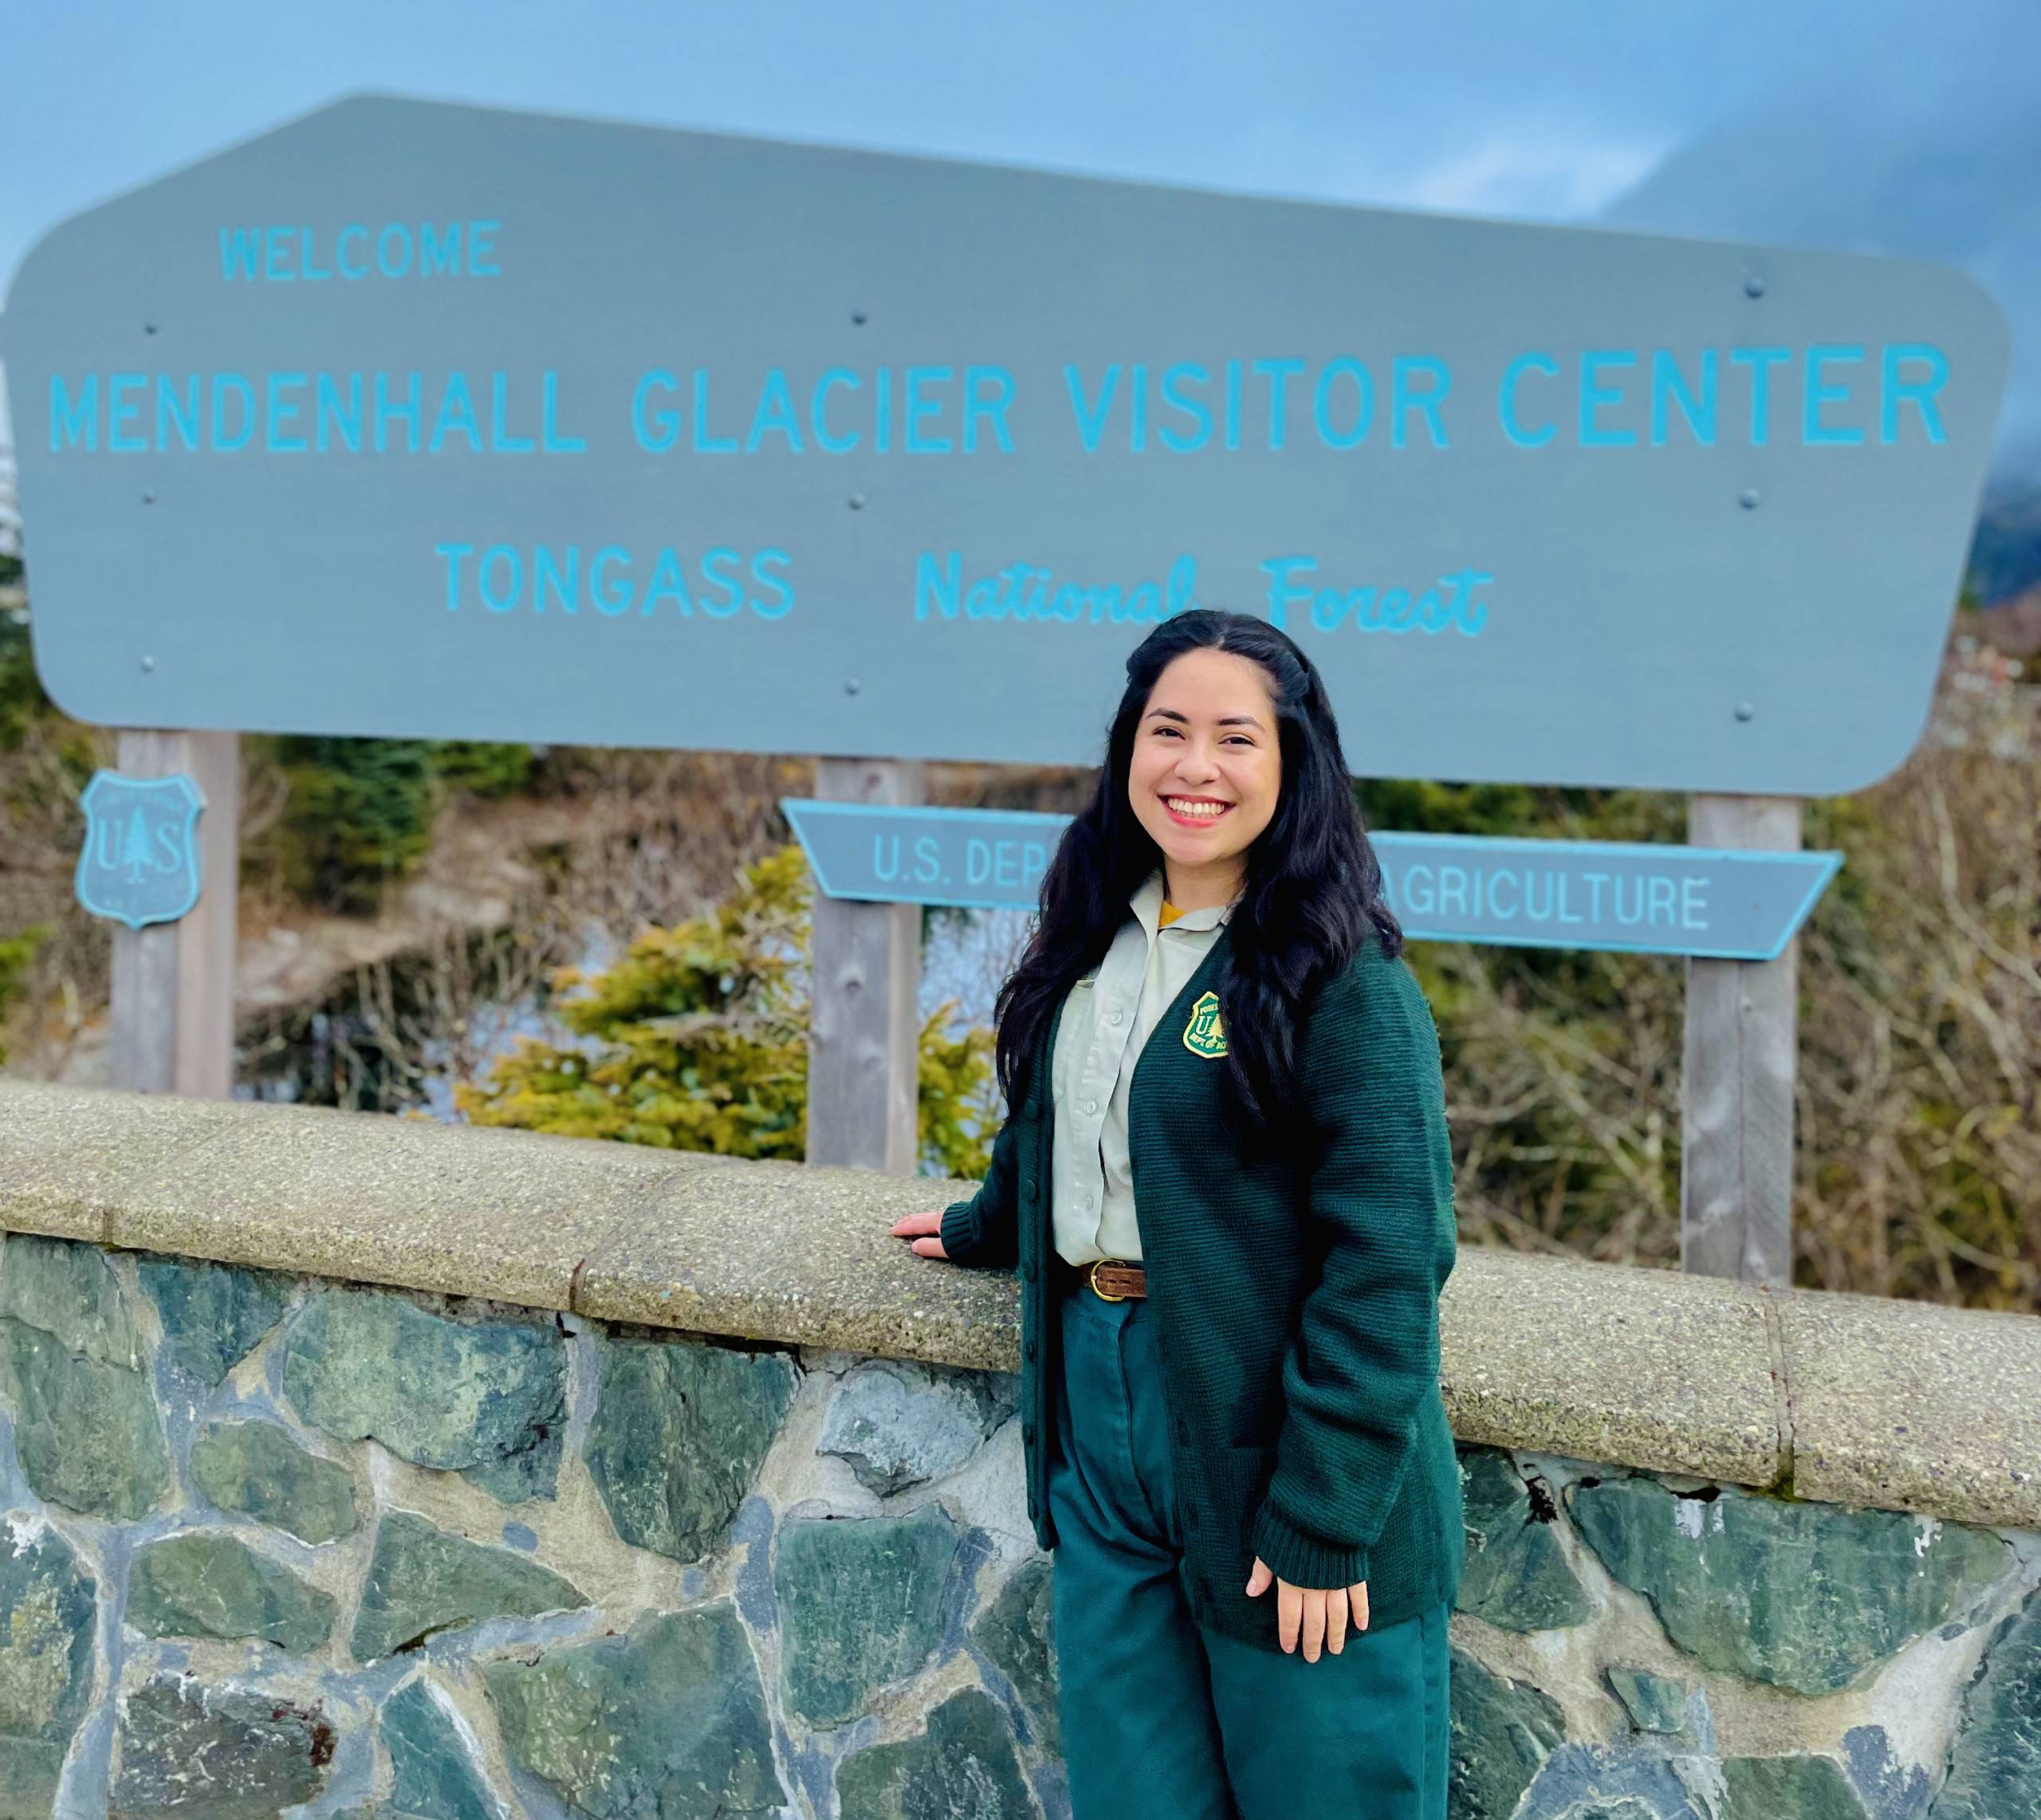 Since graduation, Lisette Perez has been able to build on her passions for connecting with people. She recently completed an internship in Alaska focused on sharing educational information about nature with the general public. Perez was an interpretation ranger at the Mendenhall Glacier Visitor Center in Juneau, Alaska. The site, managed by the federal government through the United States Forest Service, allows individuals to explore wildlife and nature through numerous scenic walking trails. Photo courtesy of Lisette Perez.